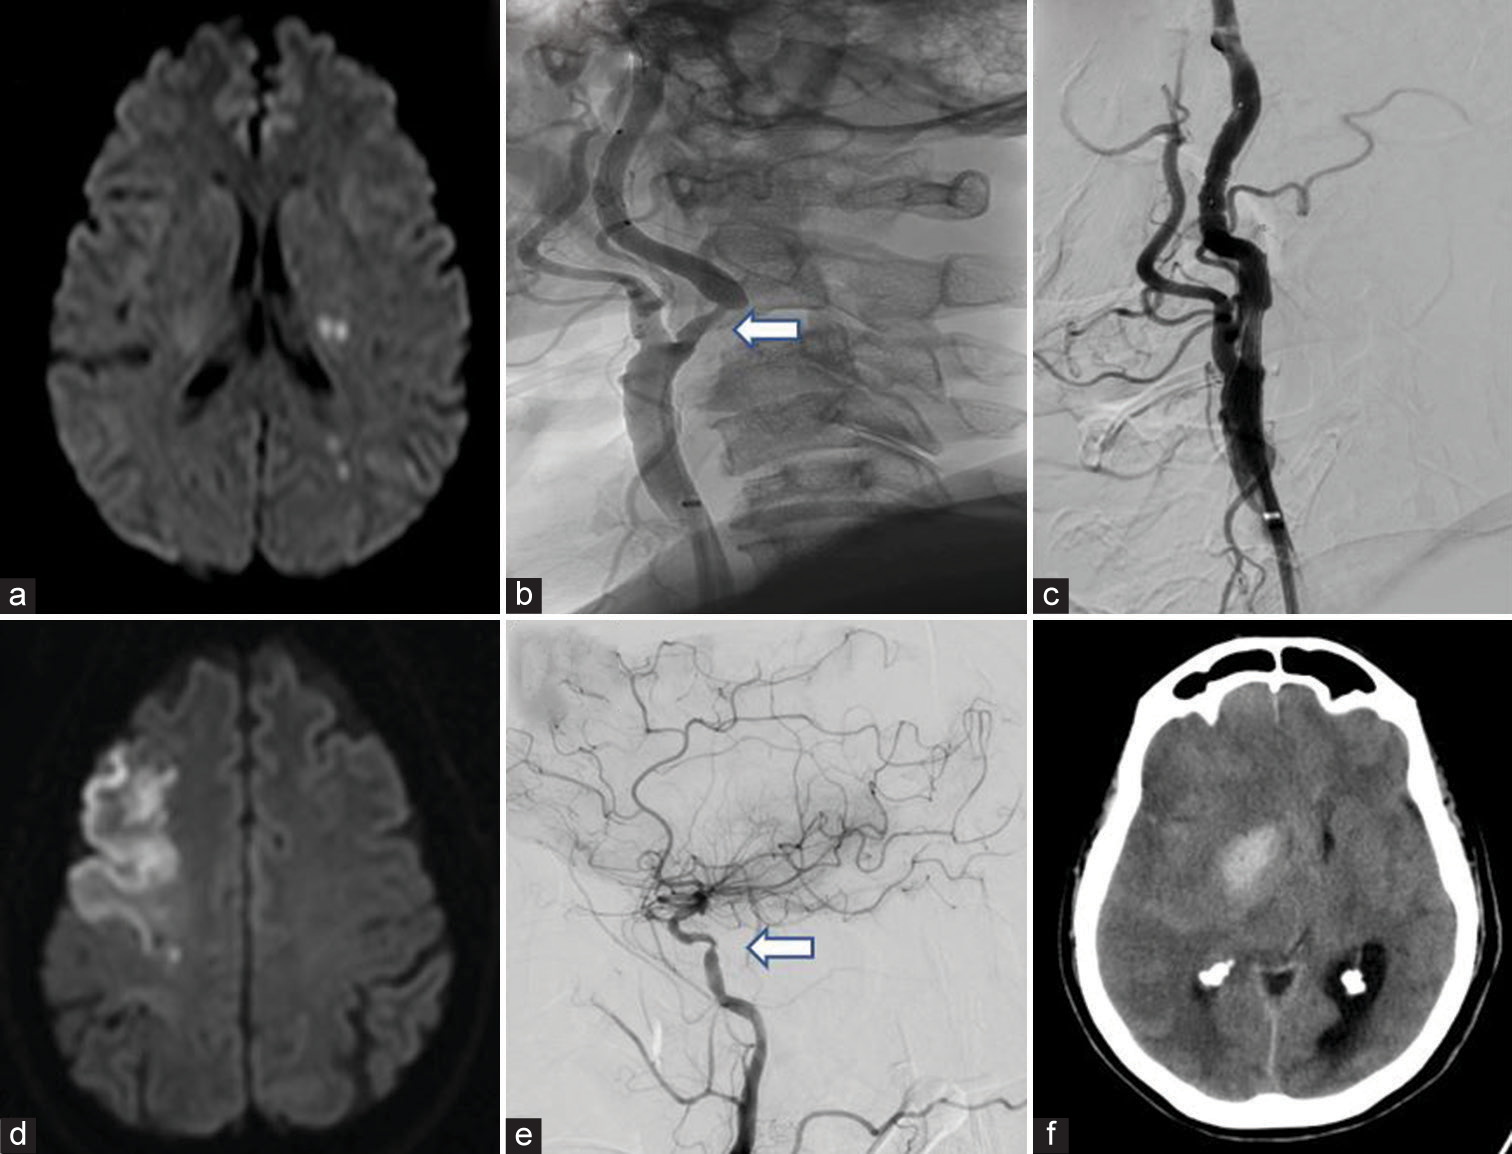 (a) Mixed infarct-Left middle cerebral artery (MCA) TI with MCA- posterior cerebral artery border zone infarct, (b) Pre-stenting digital subtraction angiography (DSA) showing severe >70% stenosis (white arrow), (c) Post-stent deployment DSA showing no residual stenosis, (d) territorial infarct in right MCA, (e) DSA showing tight stenosis of right internal carotid artery (white arrow), (f) Cerebral hyperperfusion syndrome – Basal ganglia hemorrhage with mass effect and vasogenic edema in same patient post-stenting.